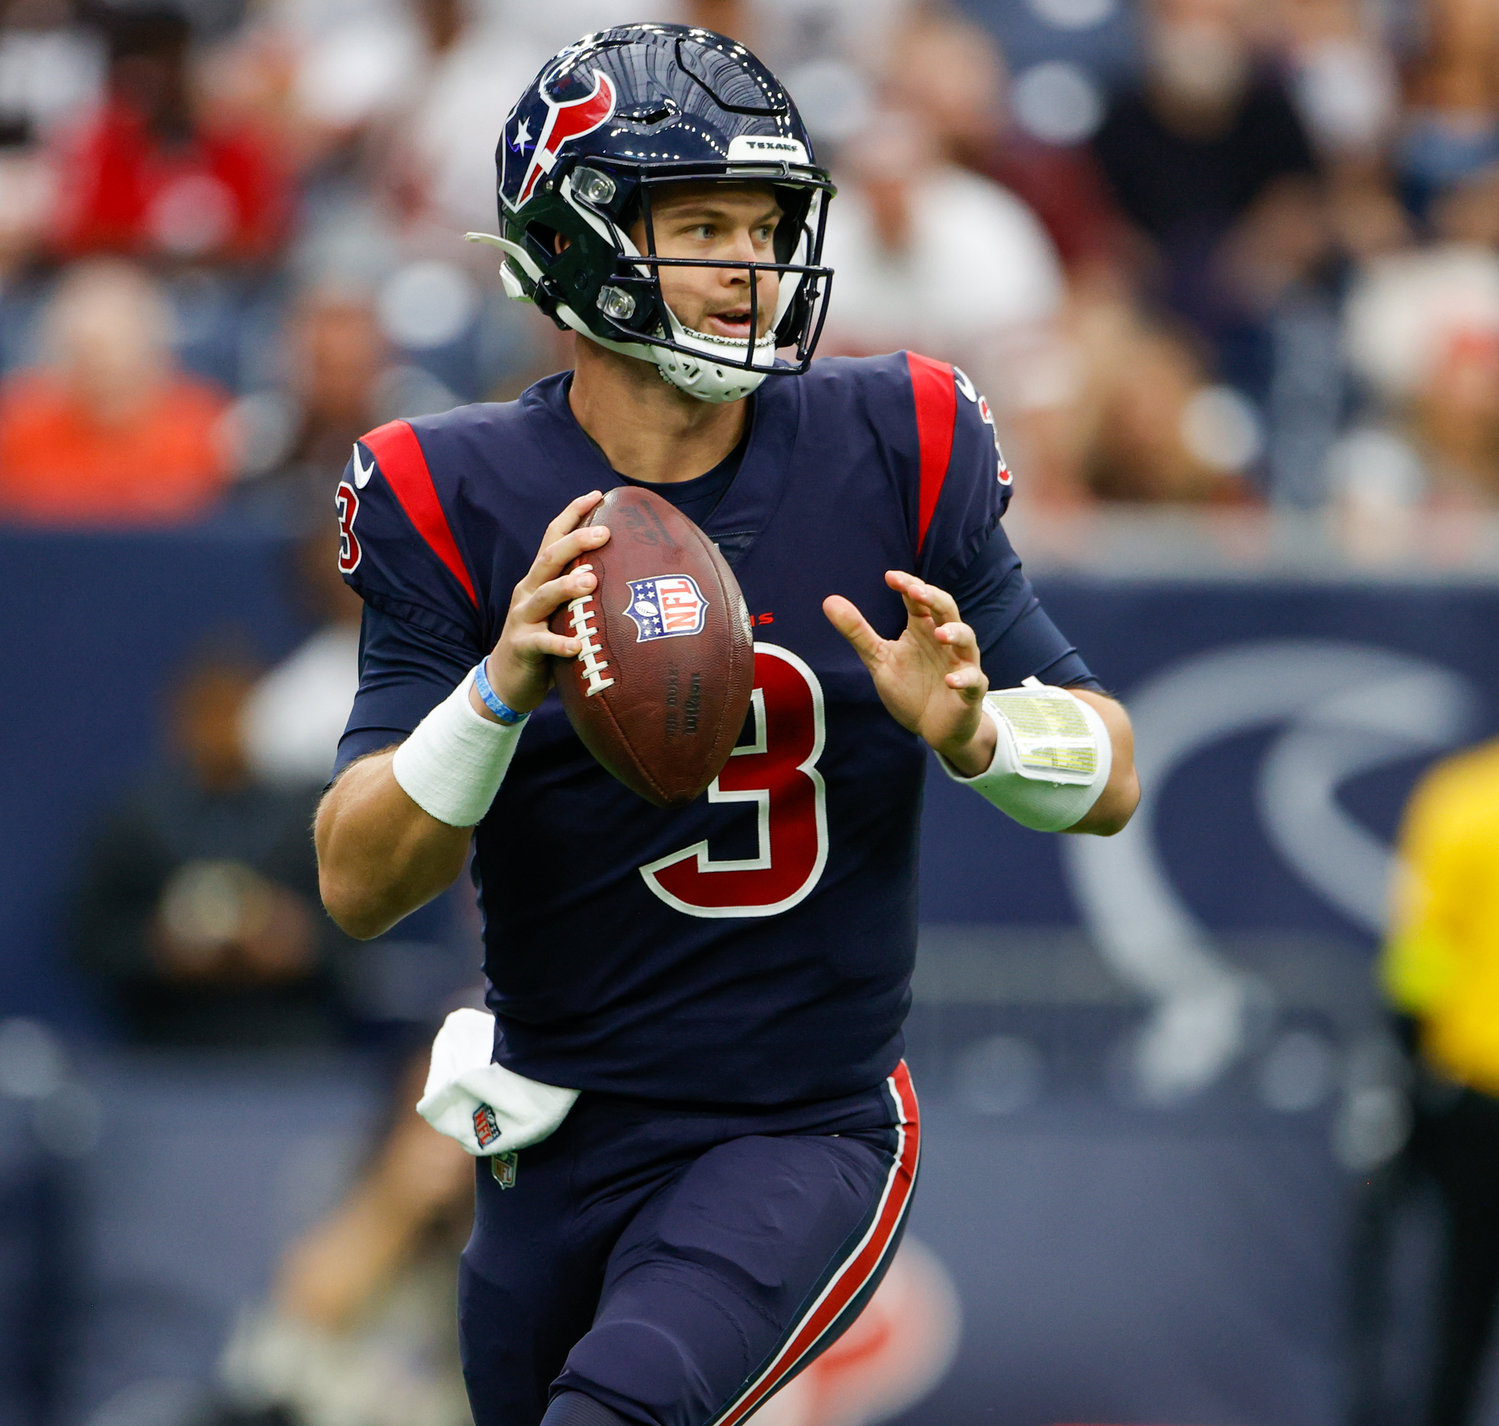 Houston Texans quarterback Kyle Allen (3) looks to pass the ball during an NFL game between the Houston Texans and the Cleveland Browns on Dec. 4, 2022, in Houston. The Browns won, 27-14.